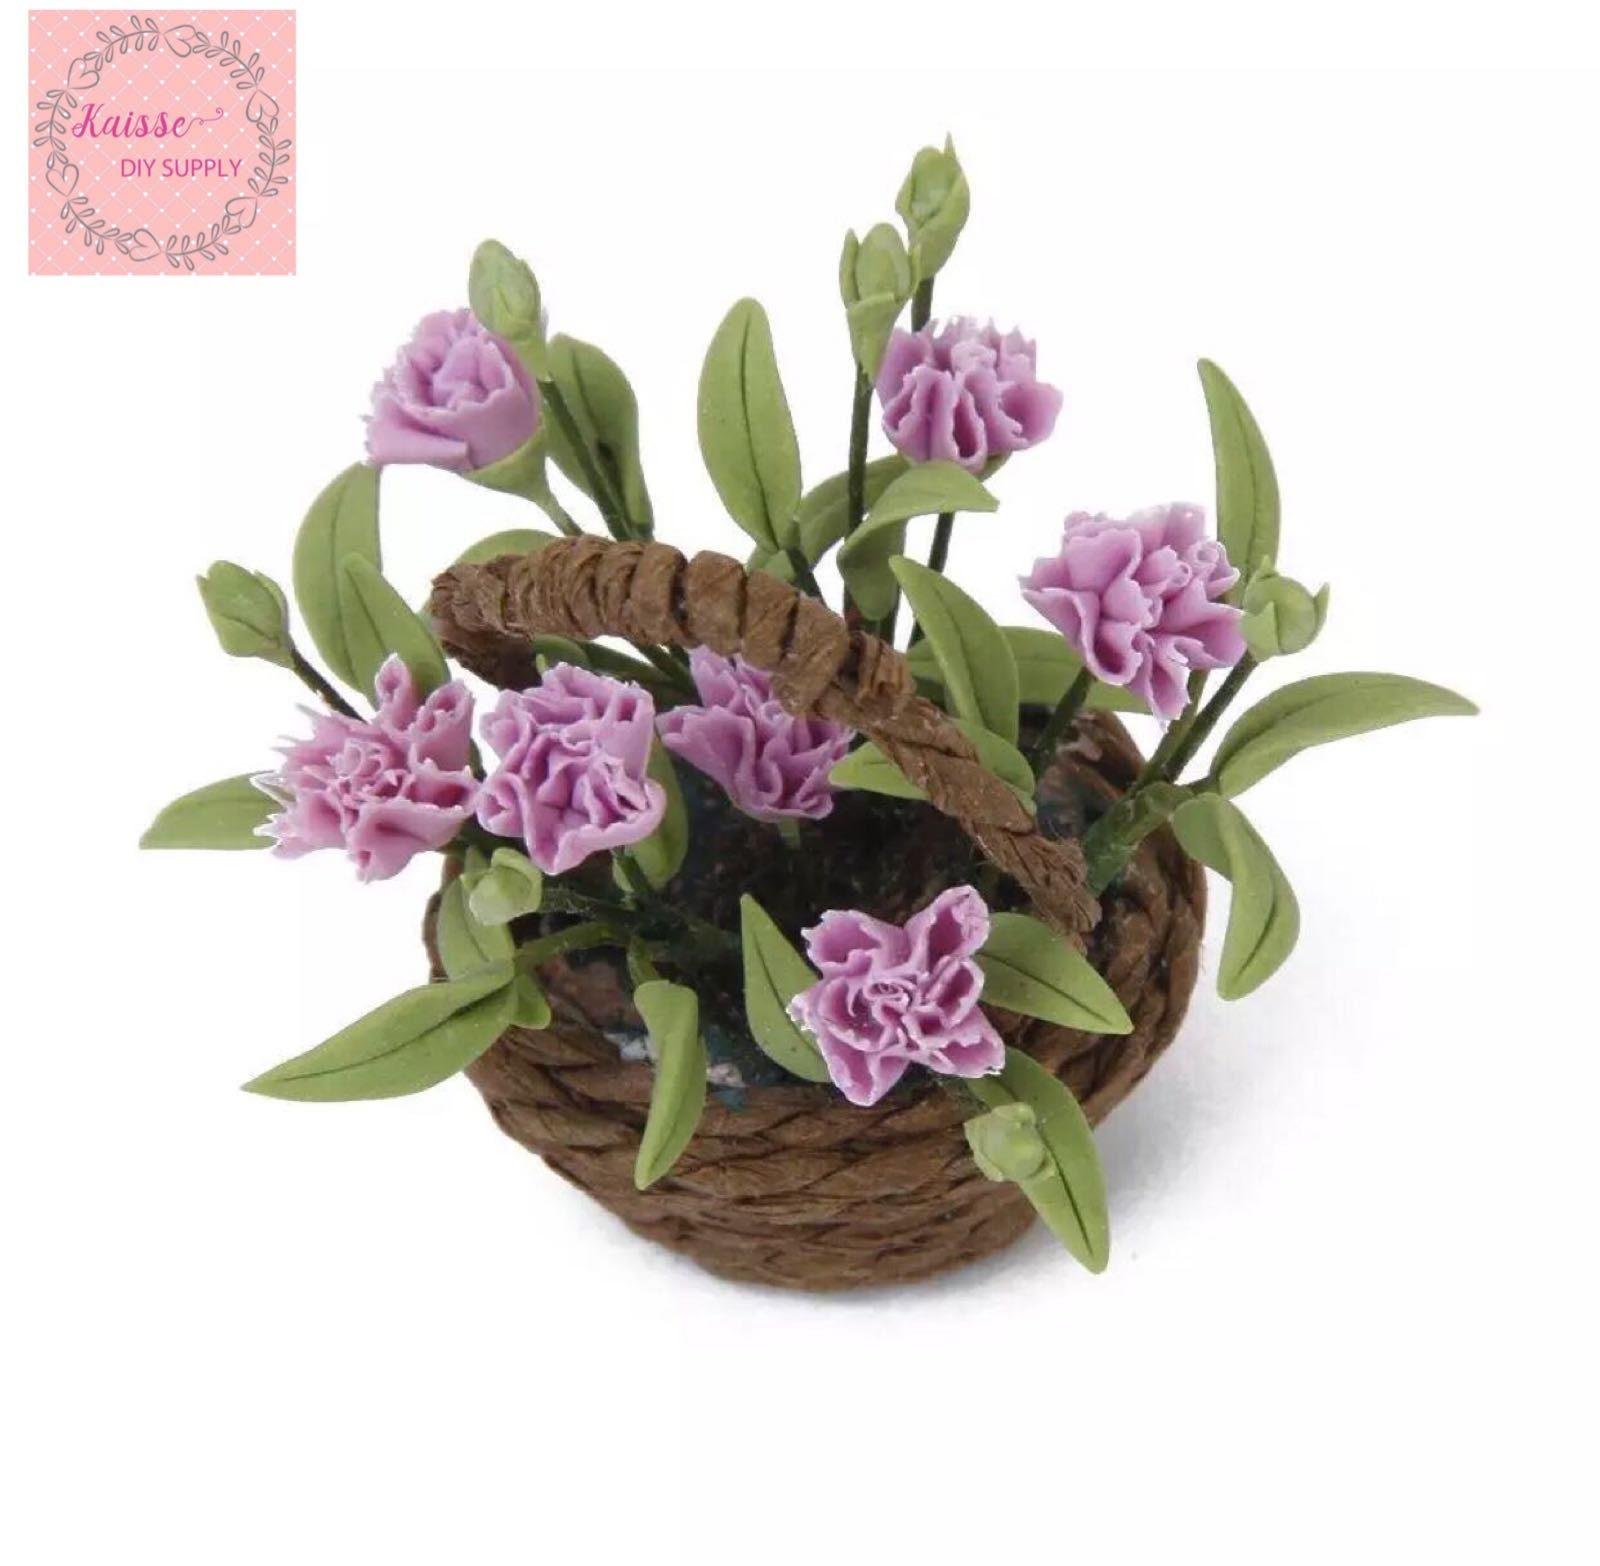 Details about   Basket of Carnations Dollhouse Miniature 